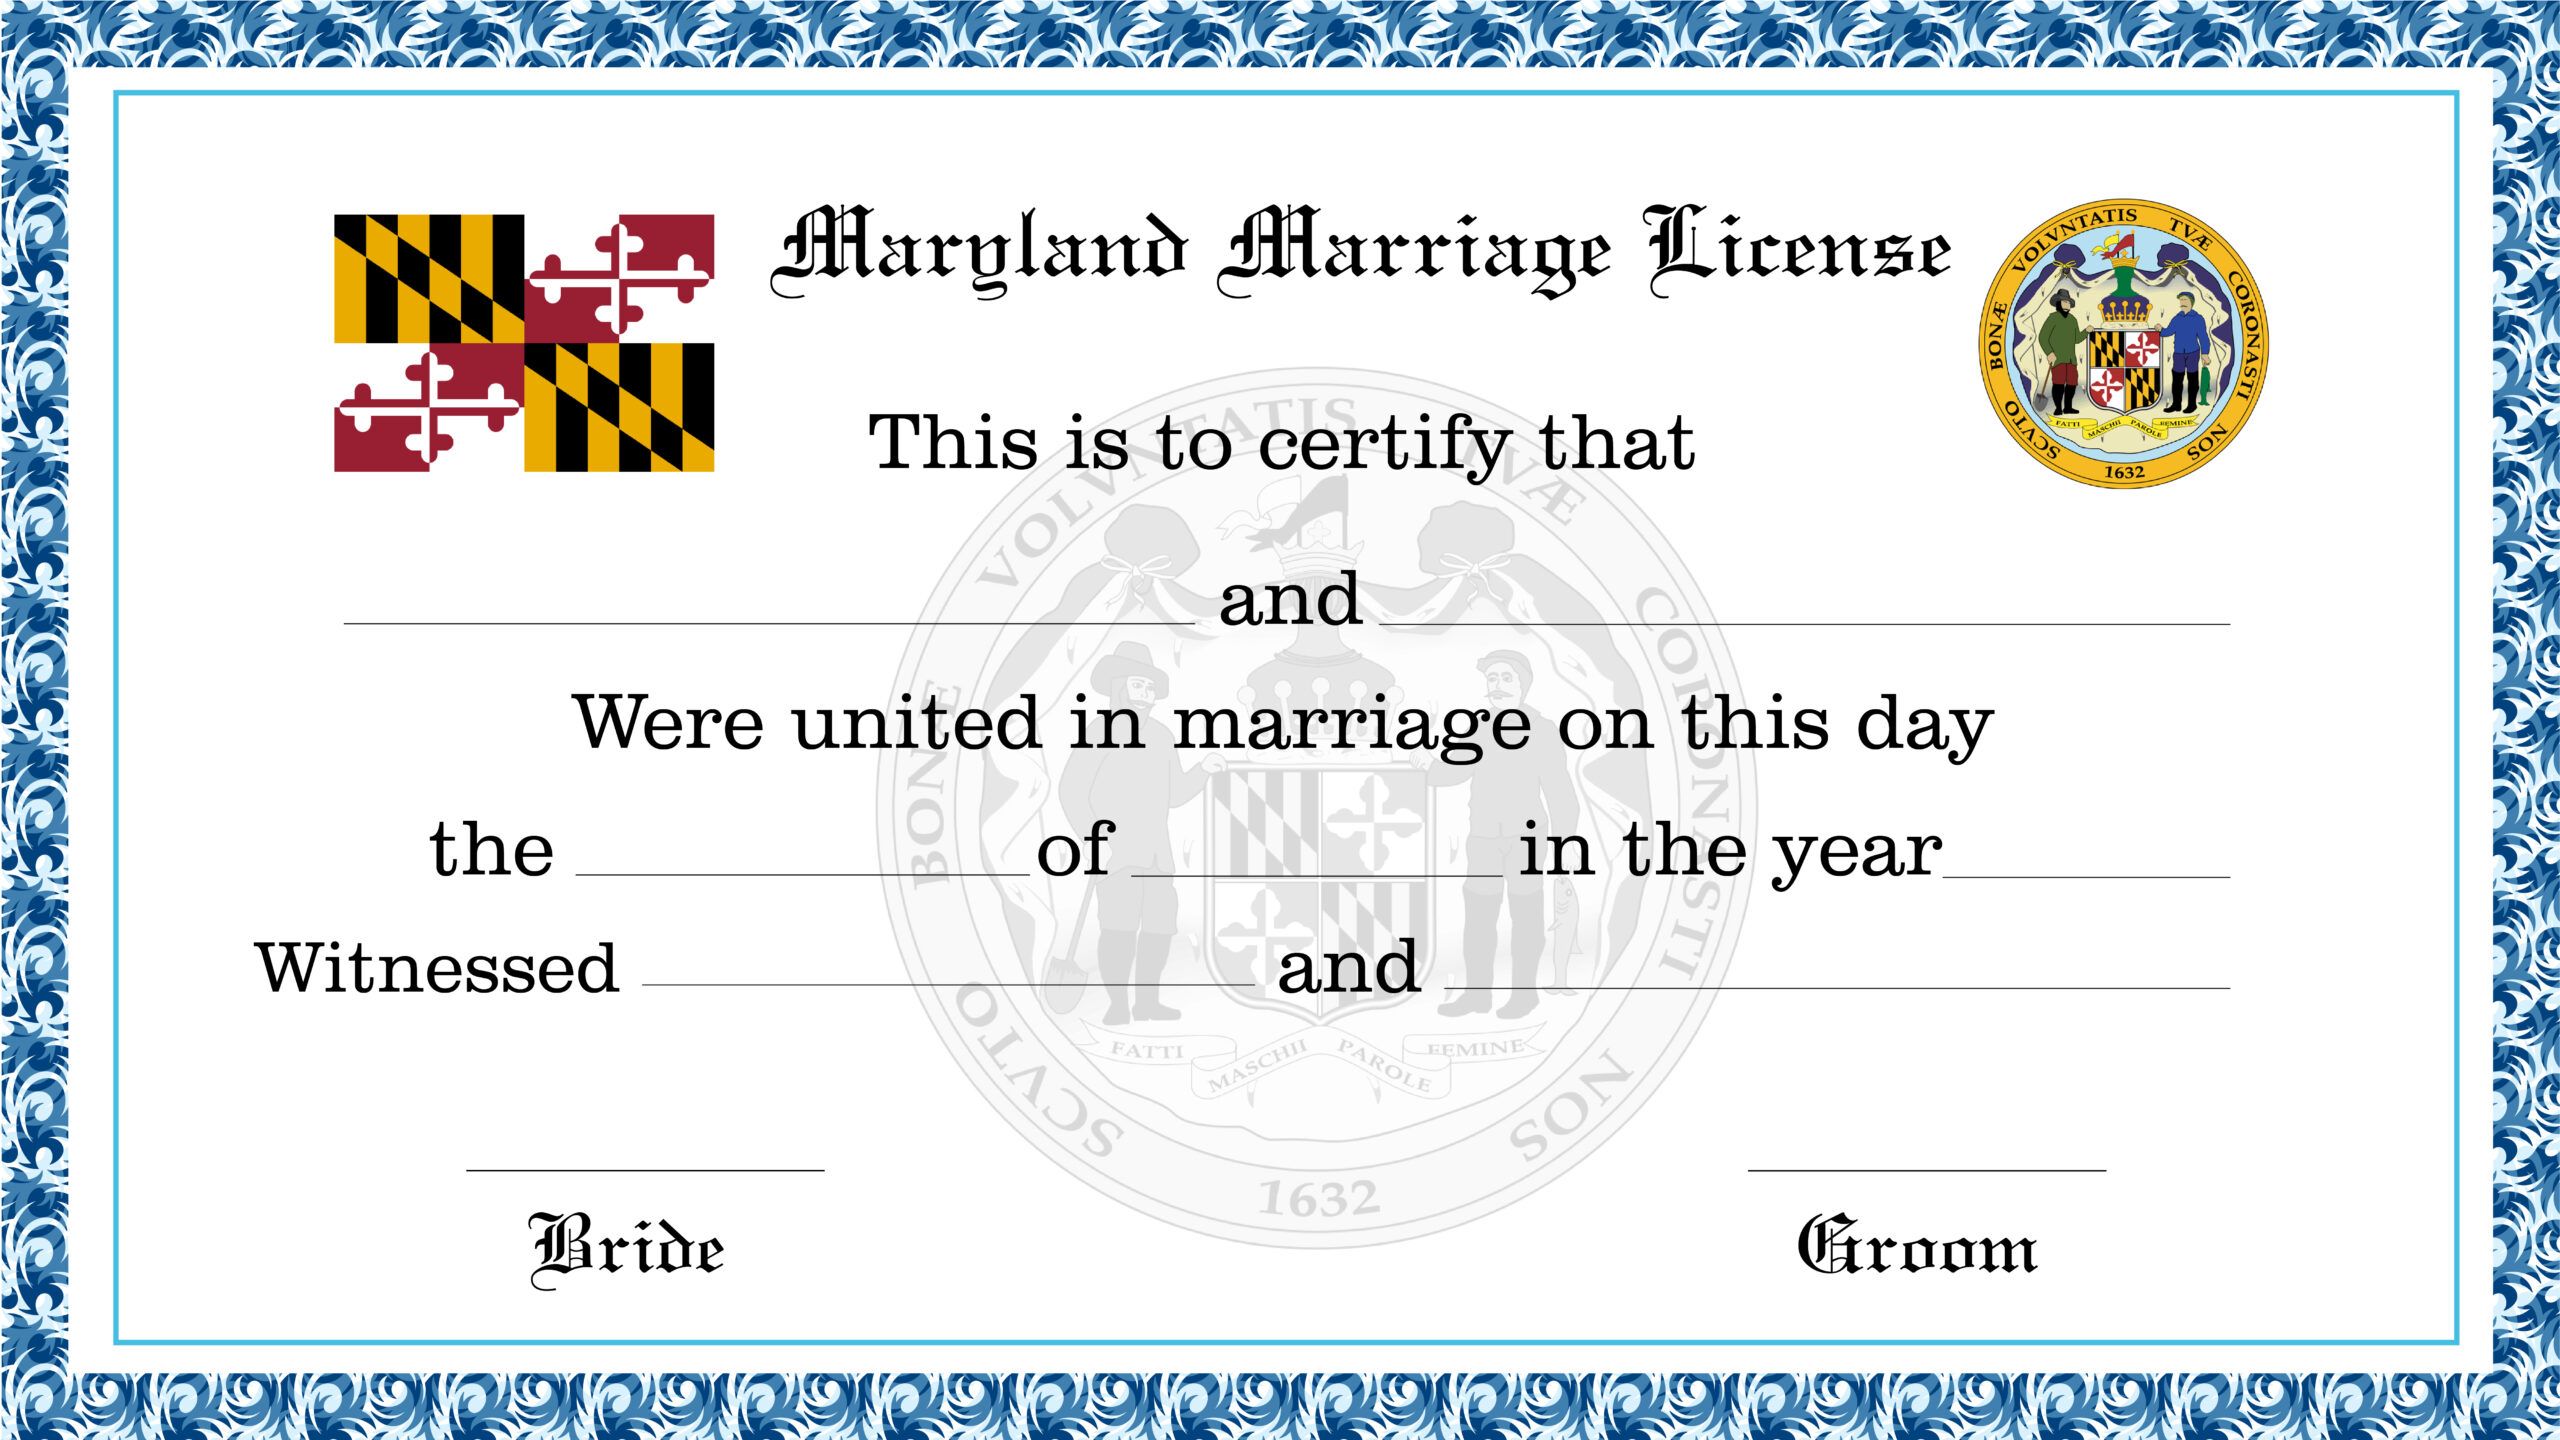 maryland-marriage-license-license-lookup